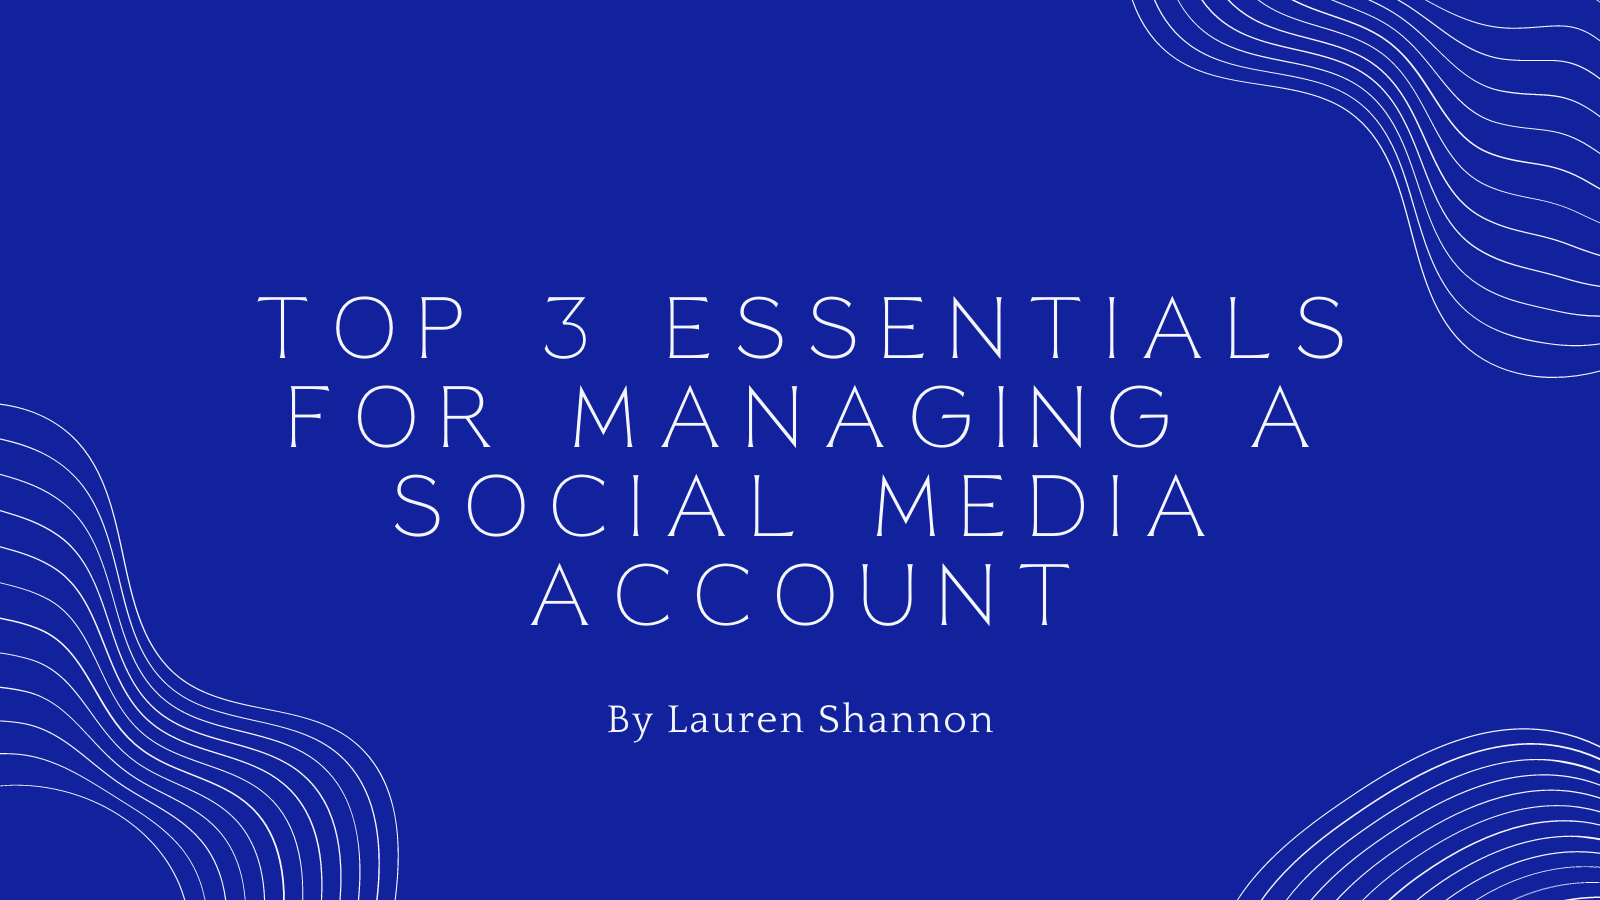 Top 3 Essentials For Managing A Social Media Account By Lauren Shannon